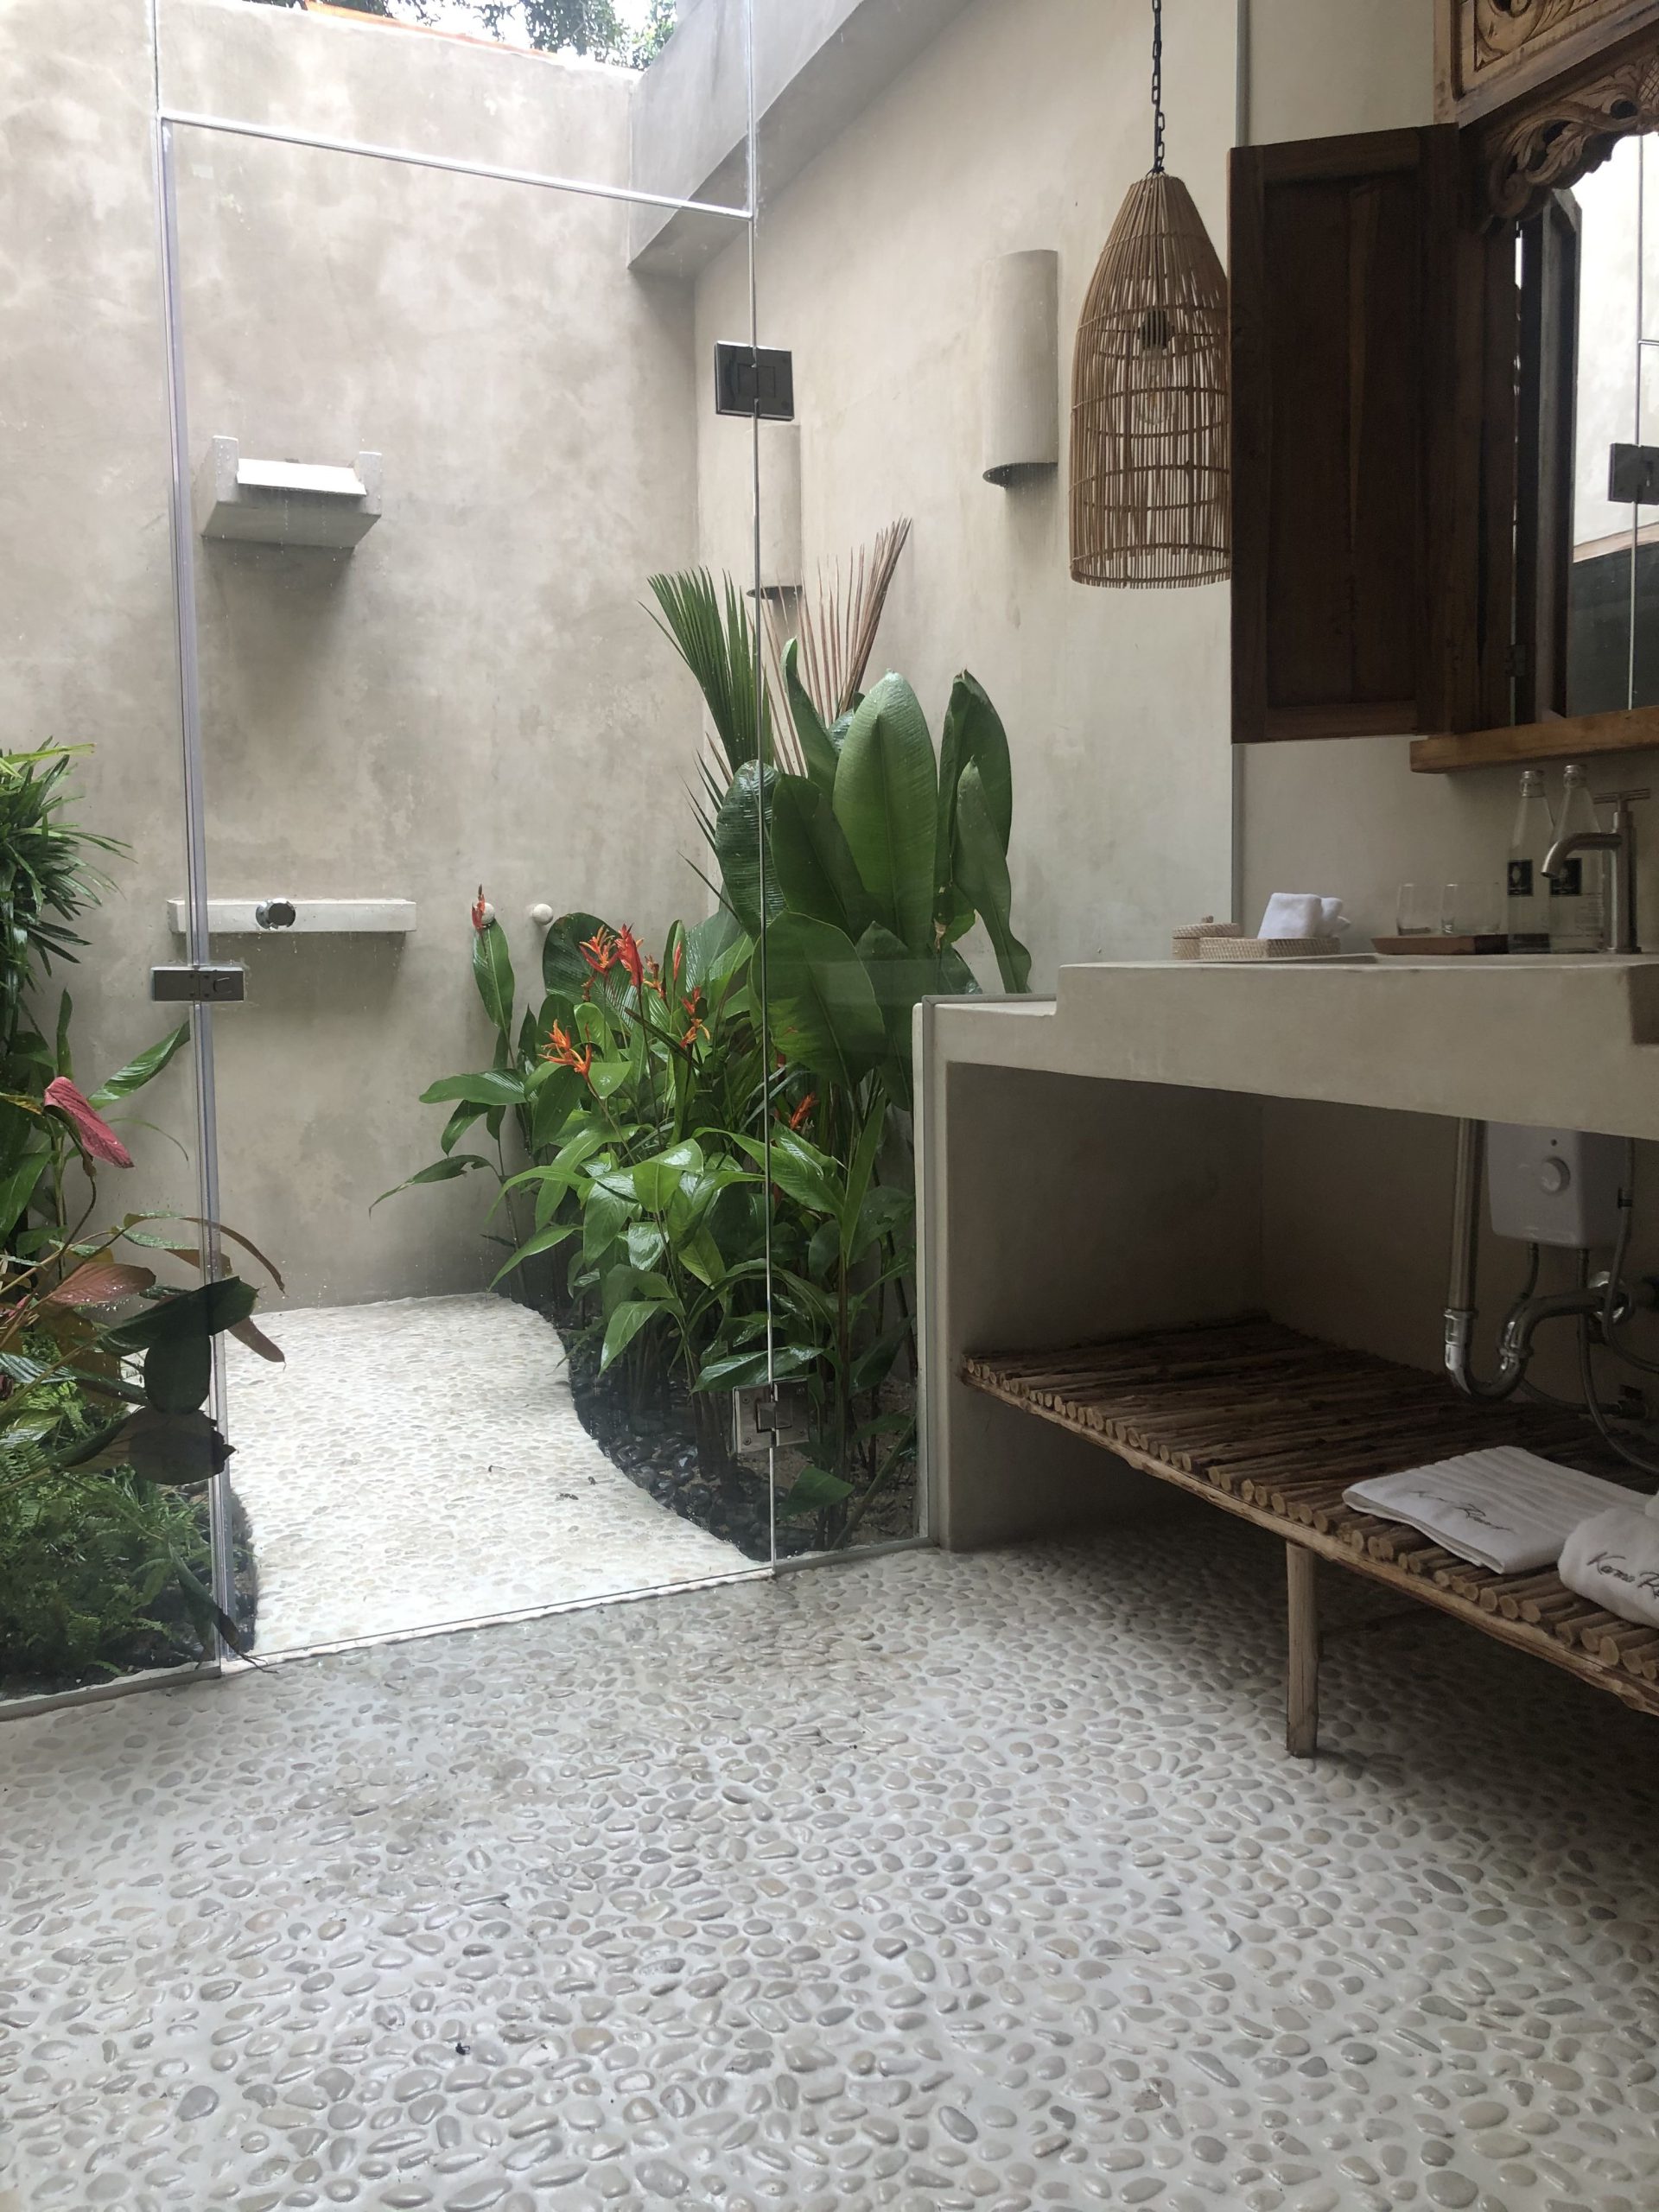 Shower Room on A Small Pathway